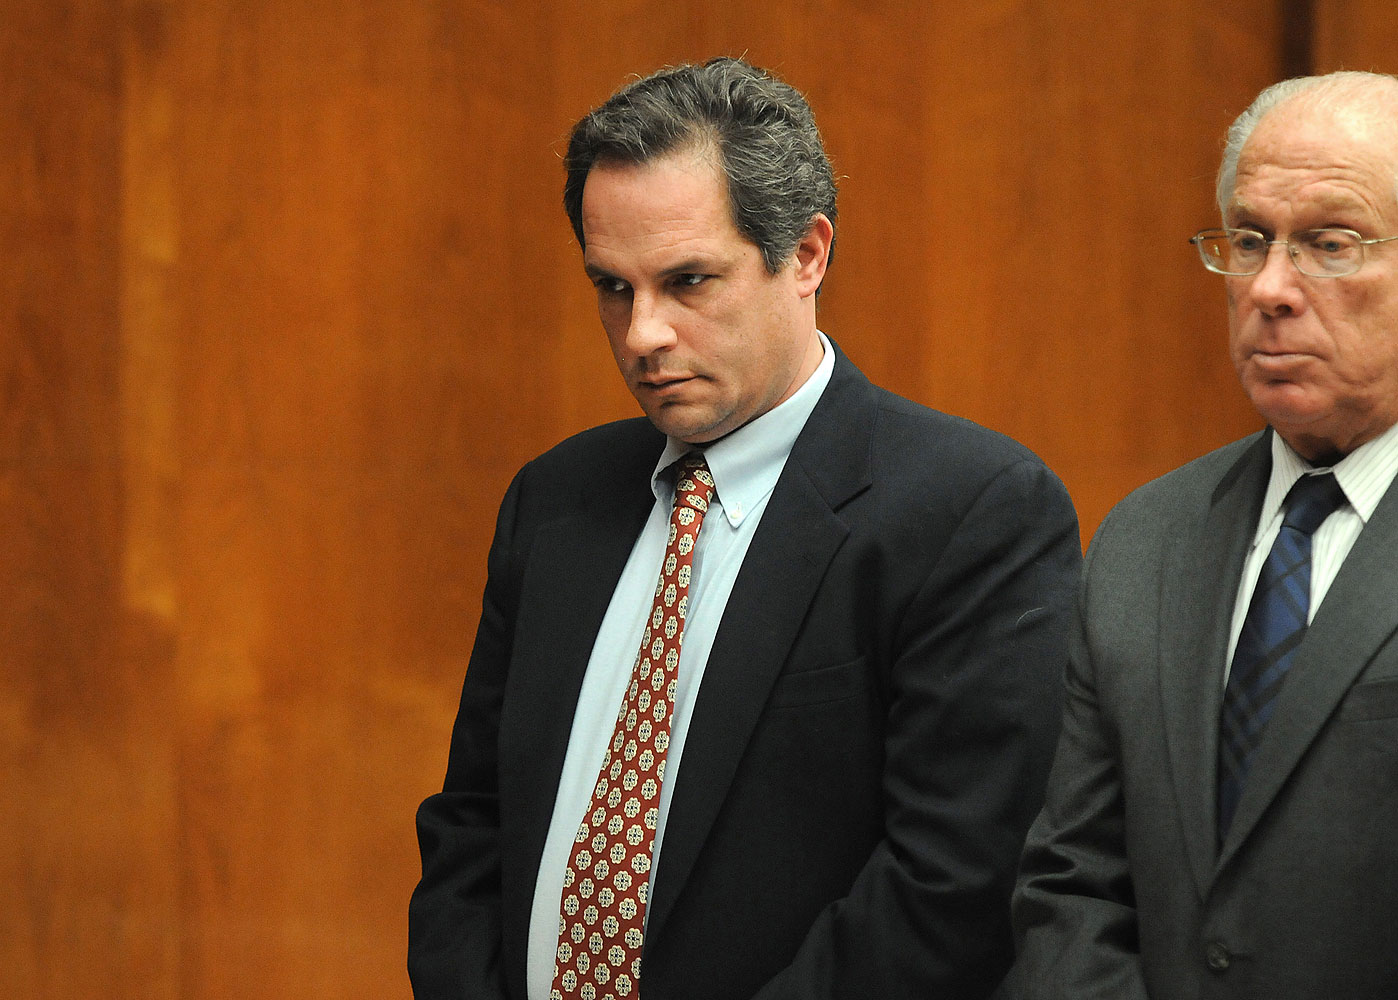 Thomas Rica, a former Ridgewood borough employee, stands with his attorney Robert Galantucci, during a hearing at the Bergen County Courthouse Wednesday, March 19, 2014, in Hackensack, N.J.